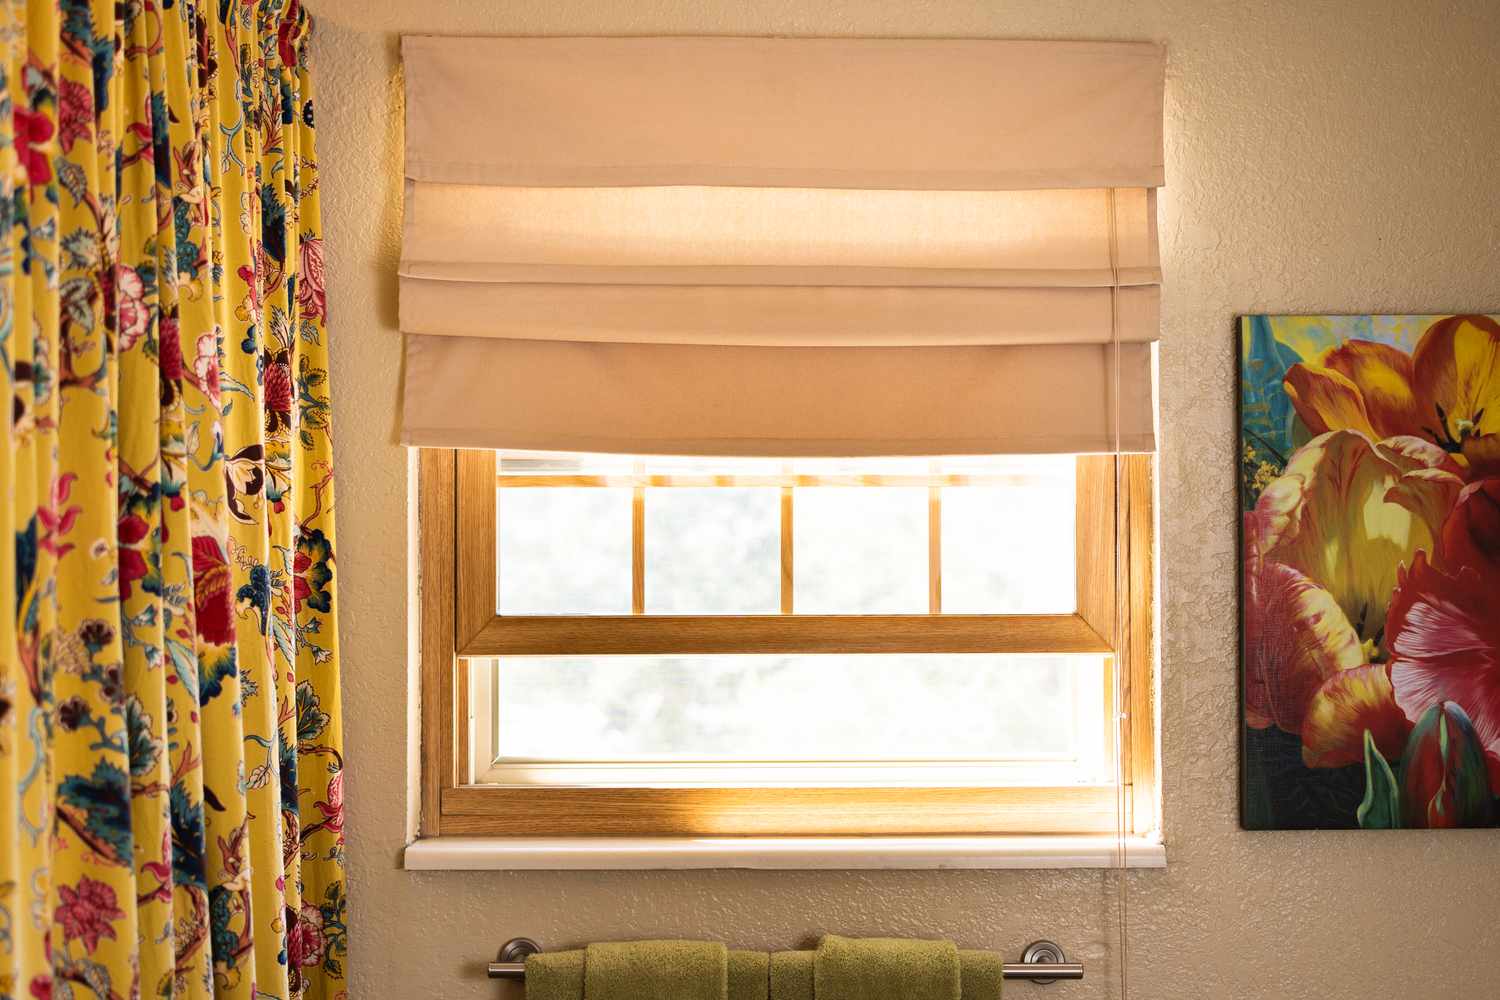 Cream-colored DIY Roman shade covering partly open window